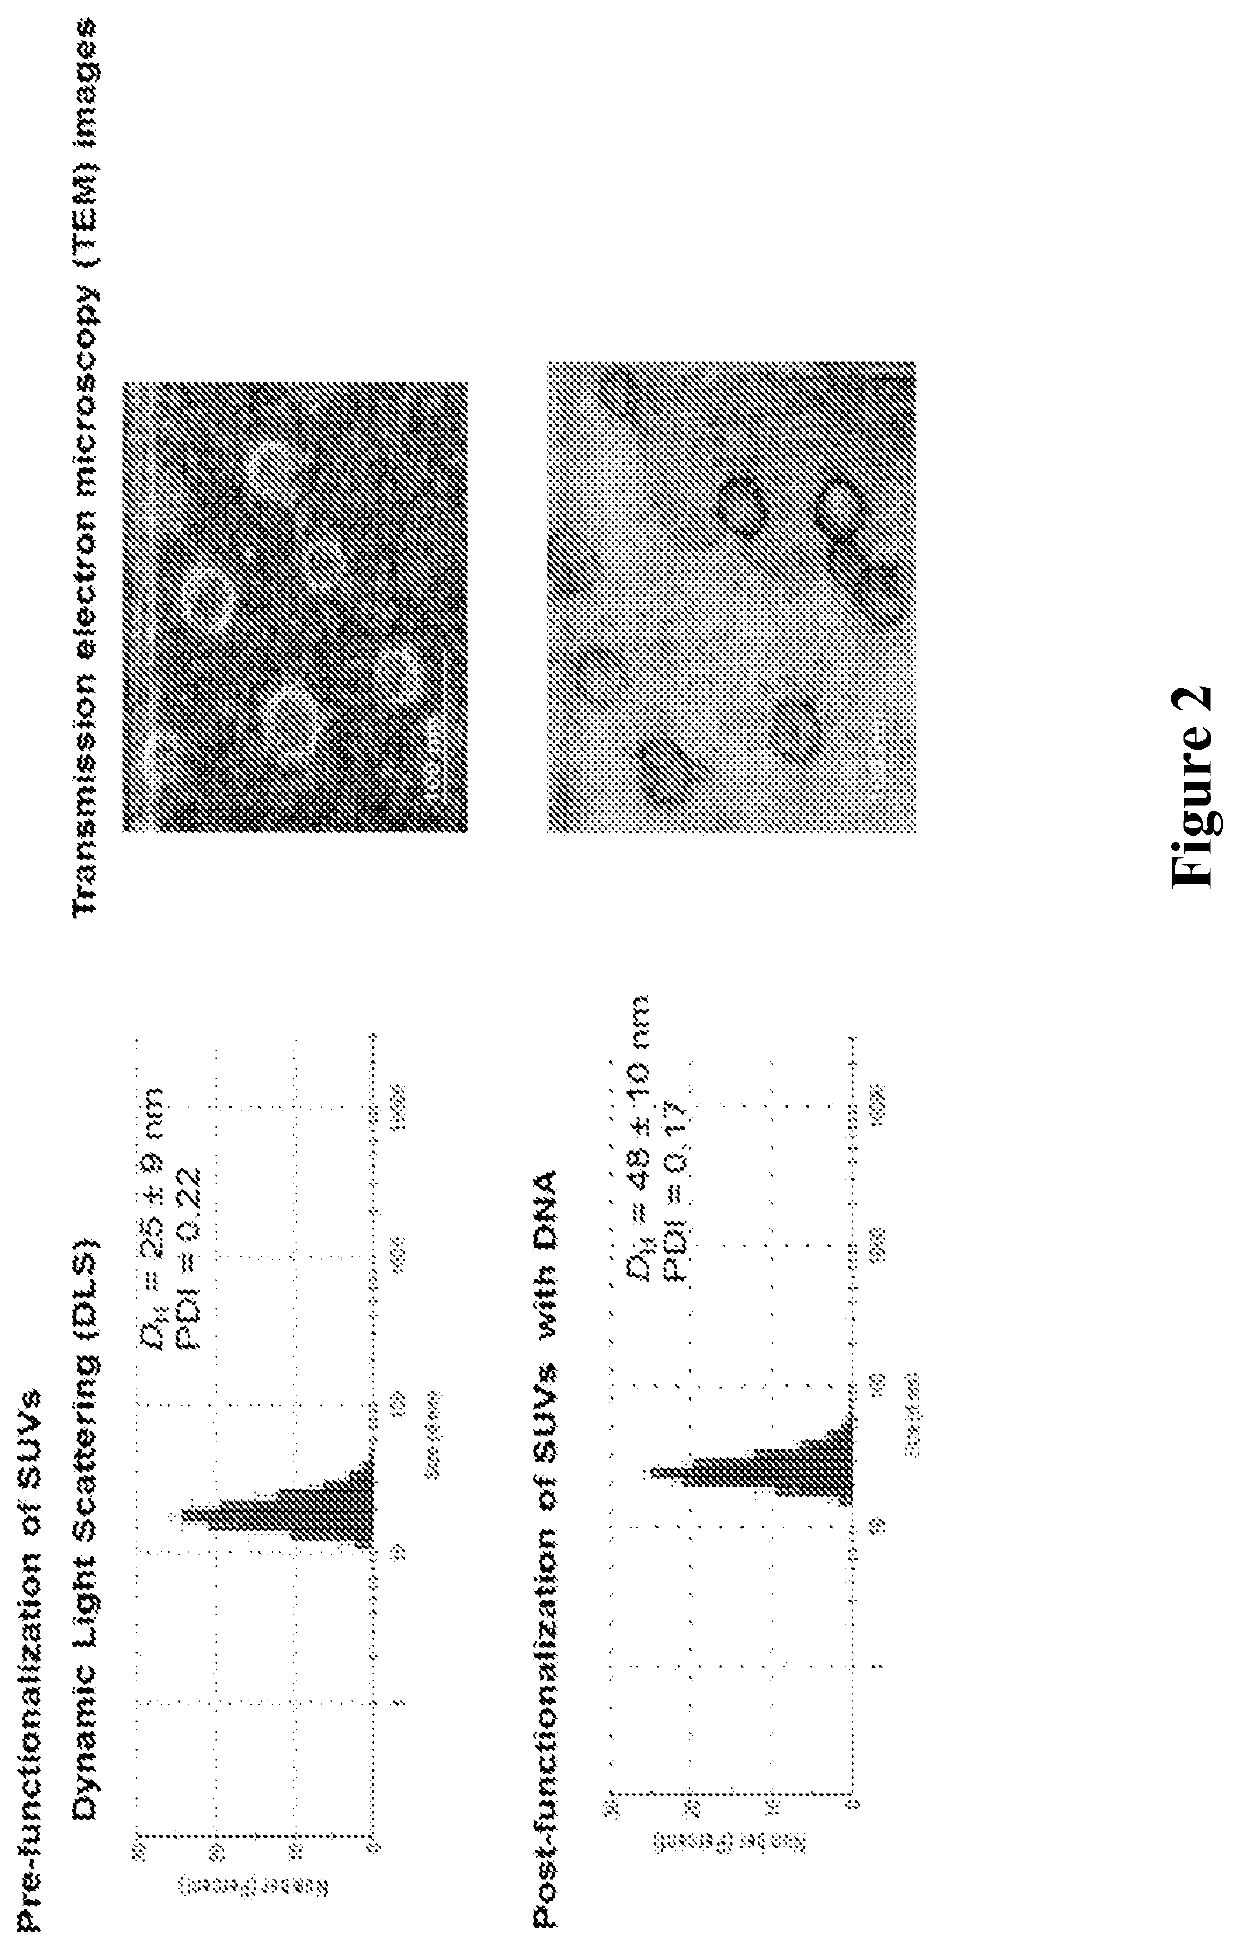 Liposomal particles, methods of making same and uses thereof